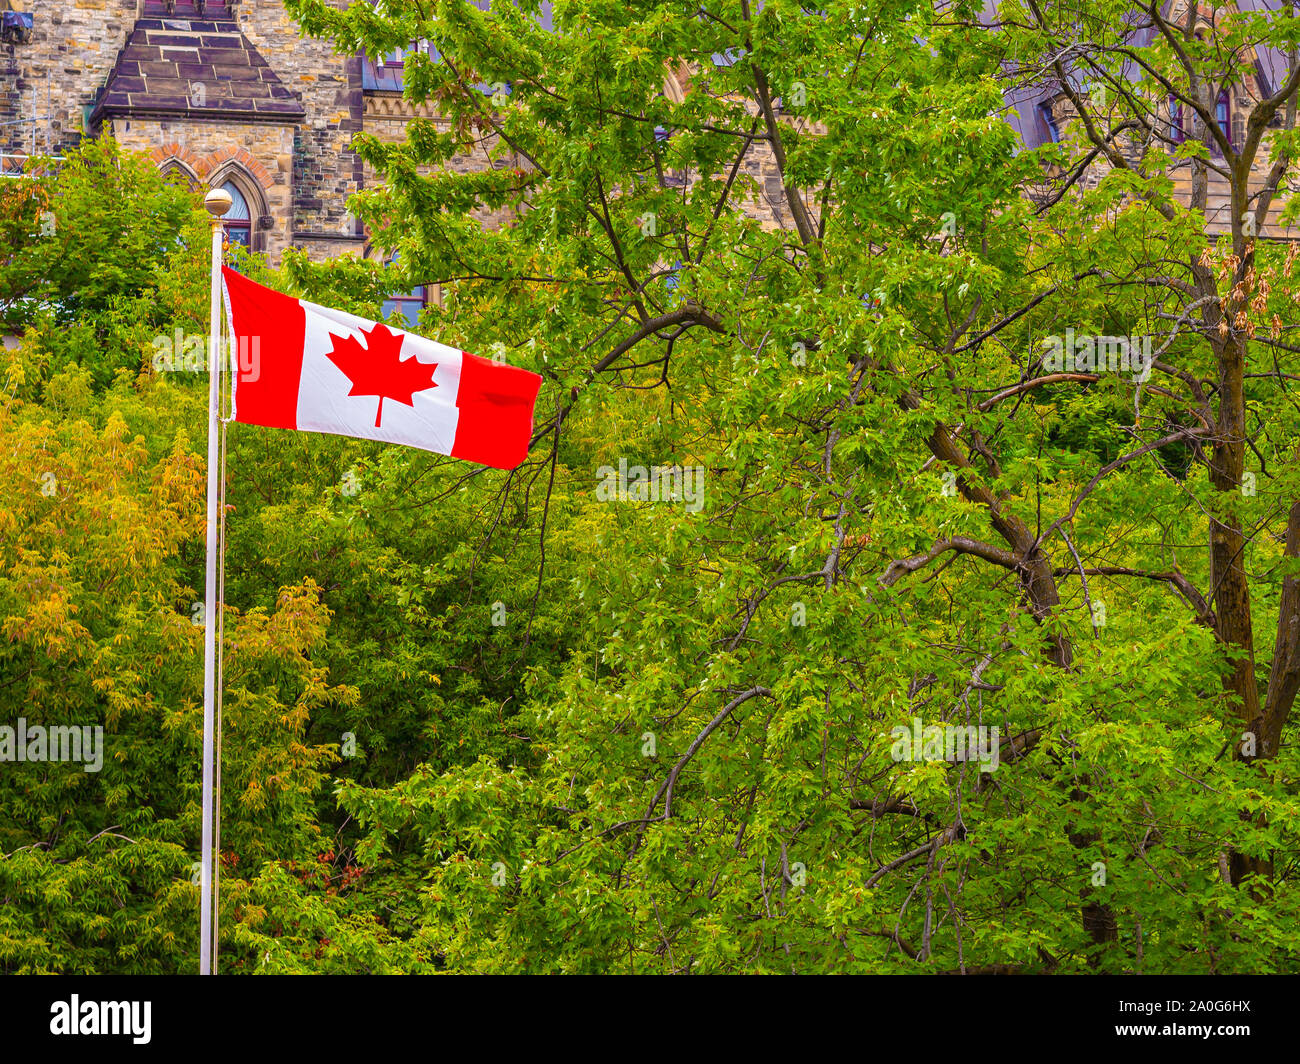 A Canadian flag blows in the wind at the end of summer, standing against trees that are beginning to change for fall. Stock Photo